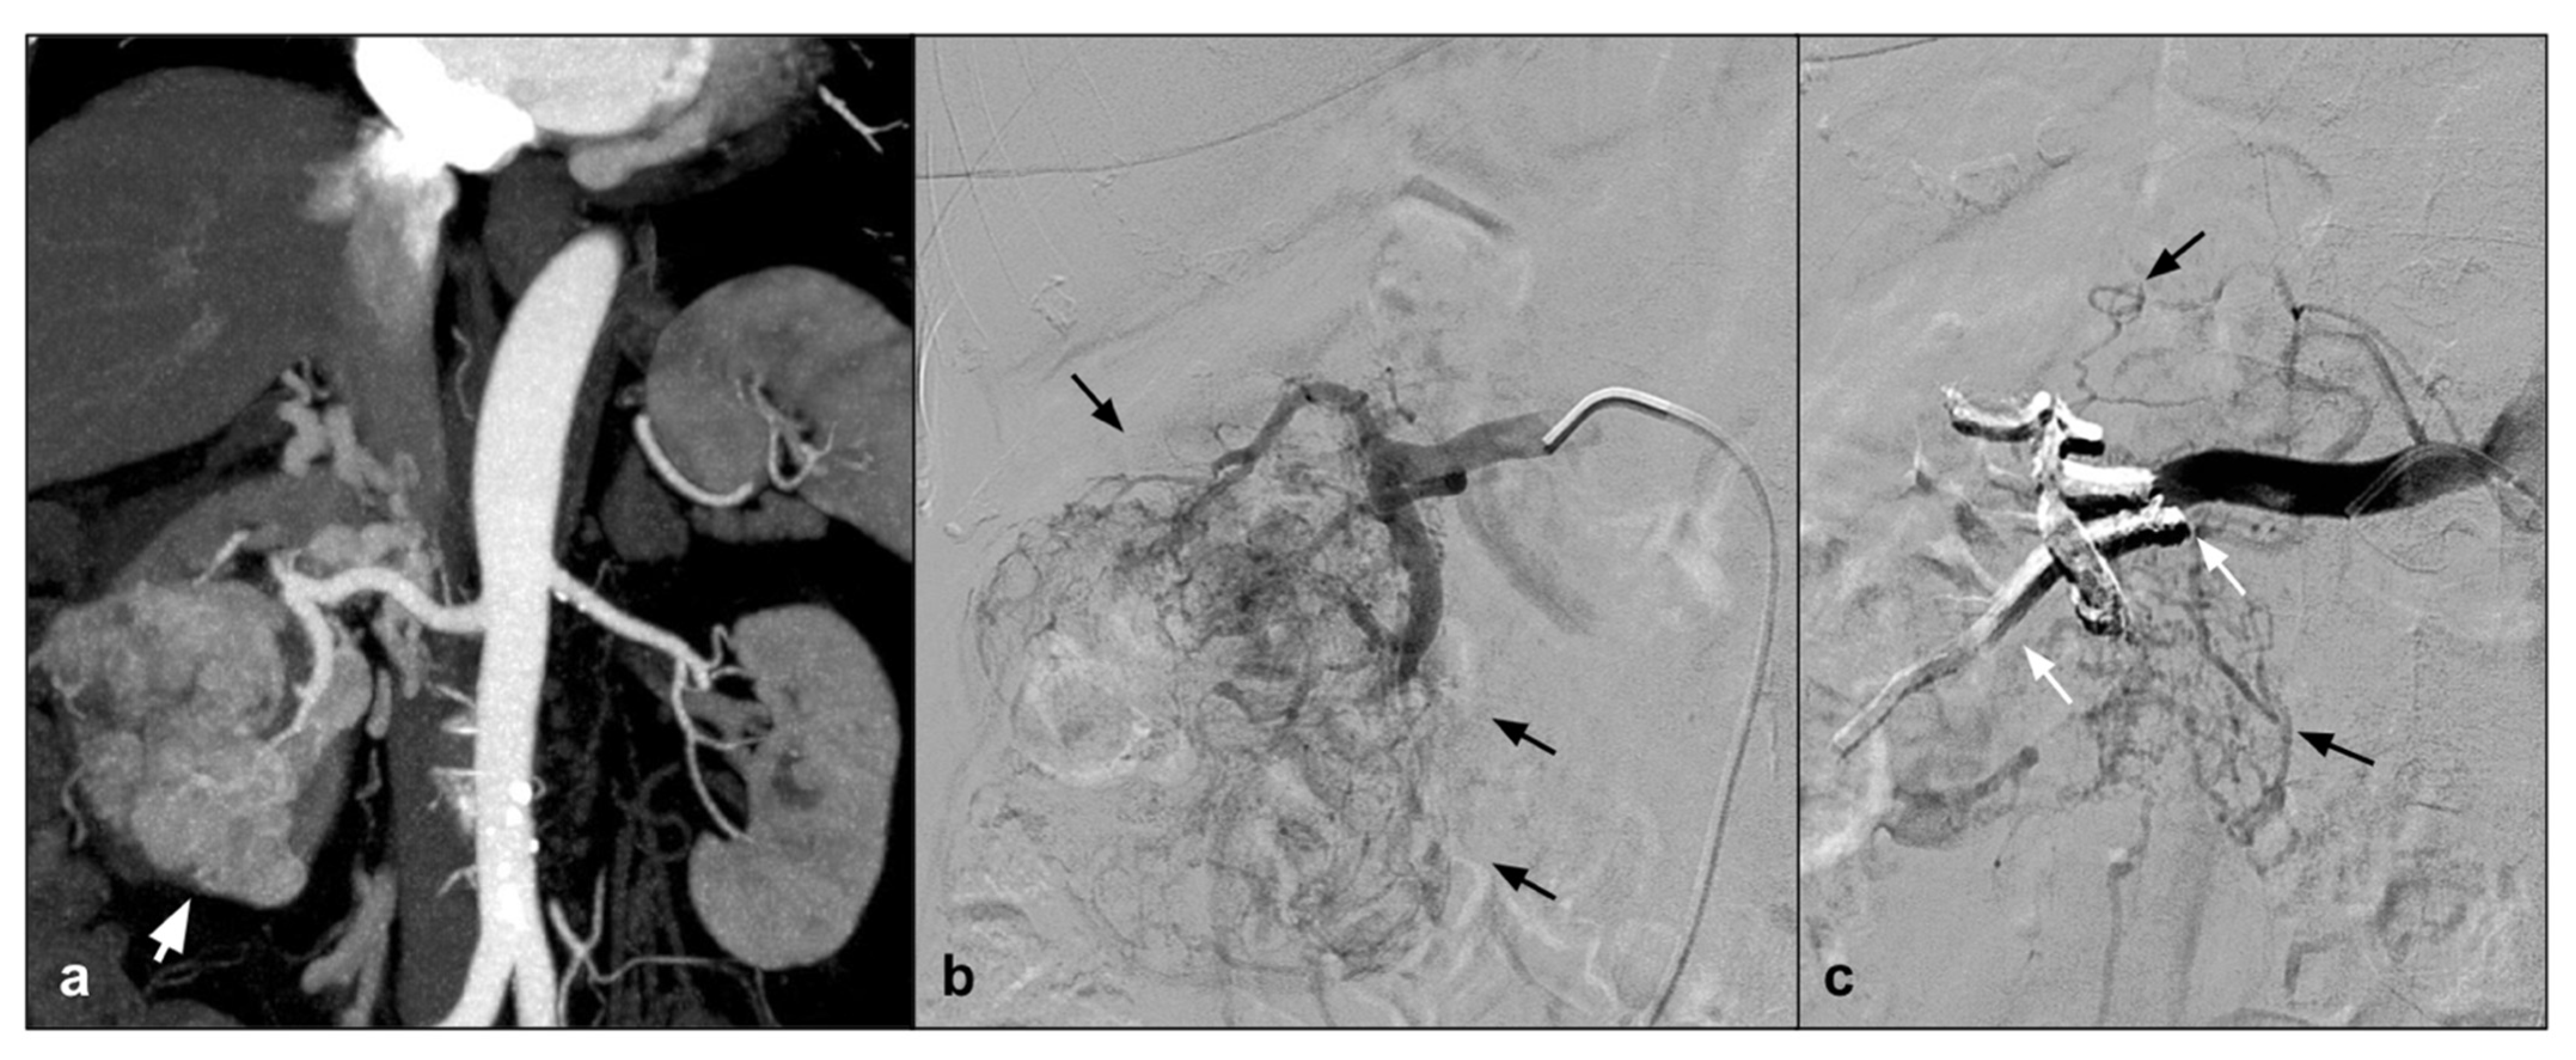 Glue, Onyx, Squid or PHIL? Liquid Embolic Agents for the Embolization of  Cerebral Arteriovenous Malformations and Dural Arteriovenous Fistulas